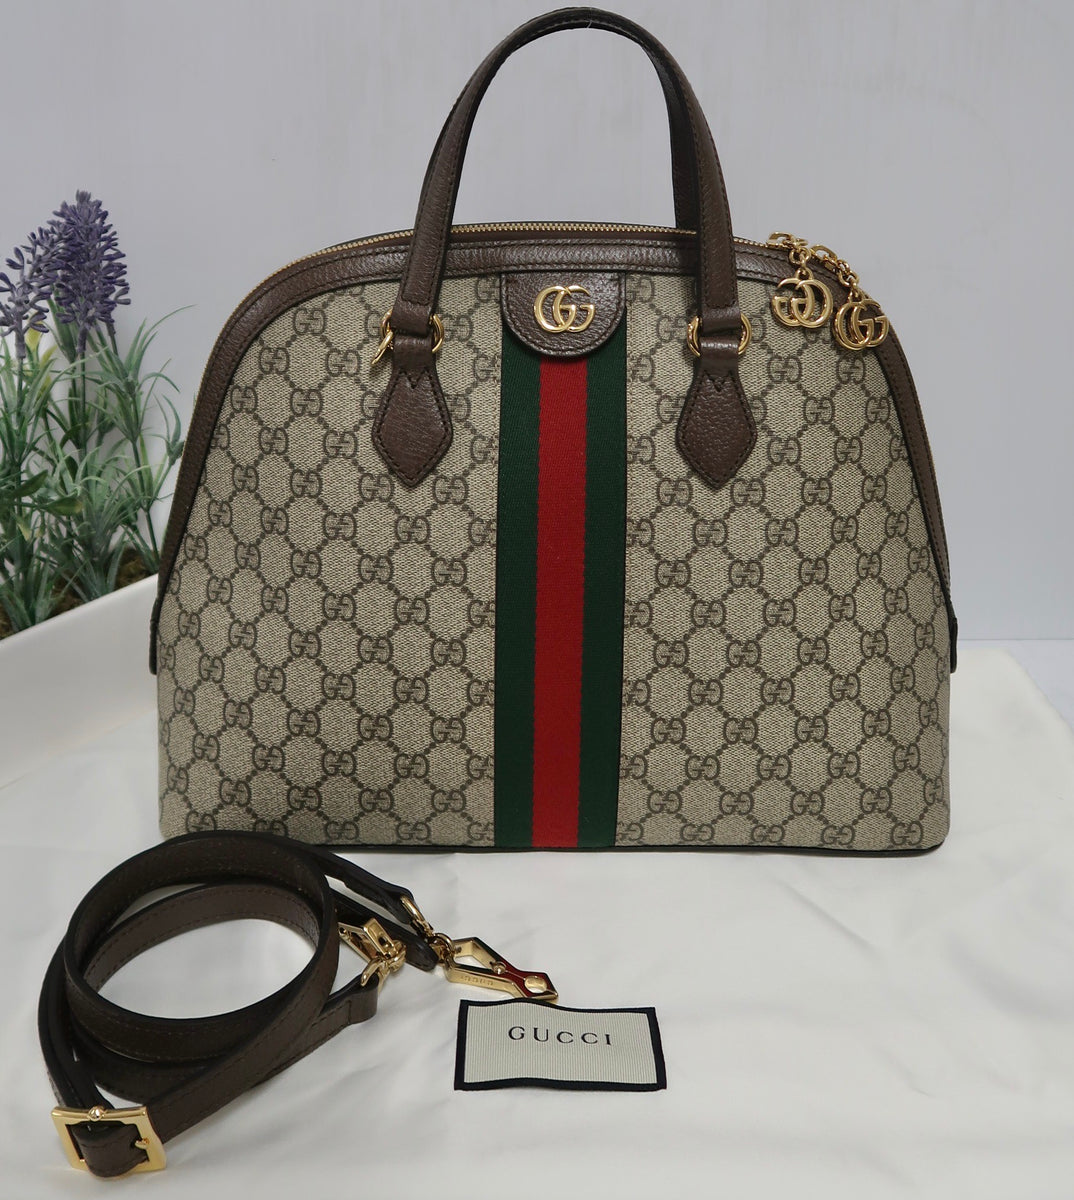 AUTHENTIC Gucci GG Supreme Ophidia Top Handle Bag PREOWNED (WBA179